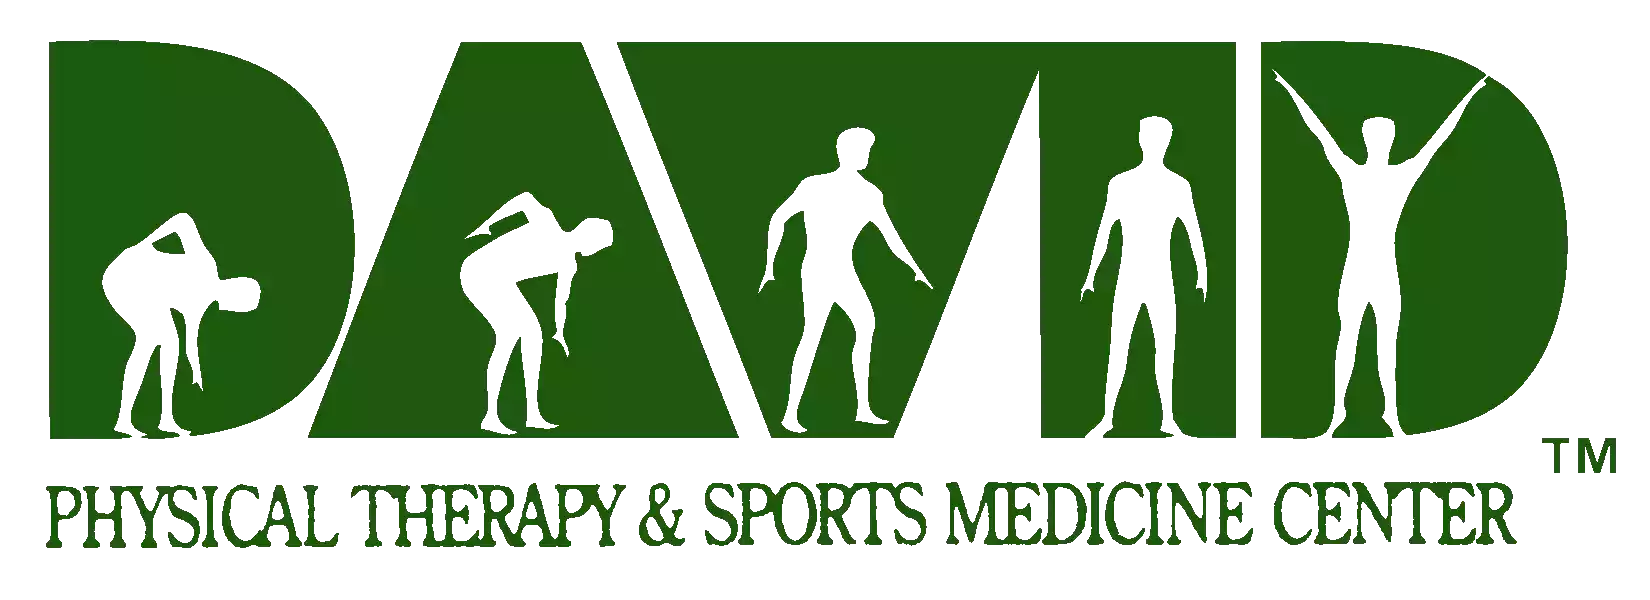 David Physical Therapy & Sports Medicine Center